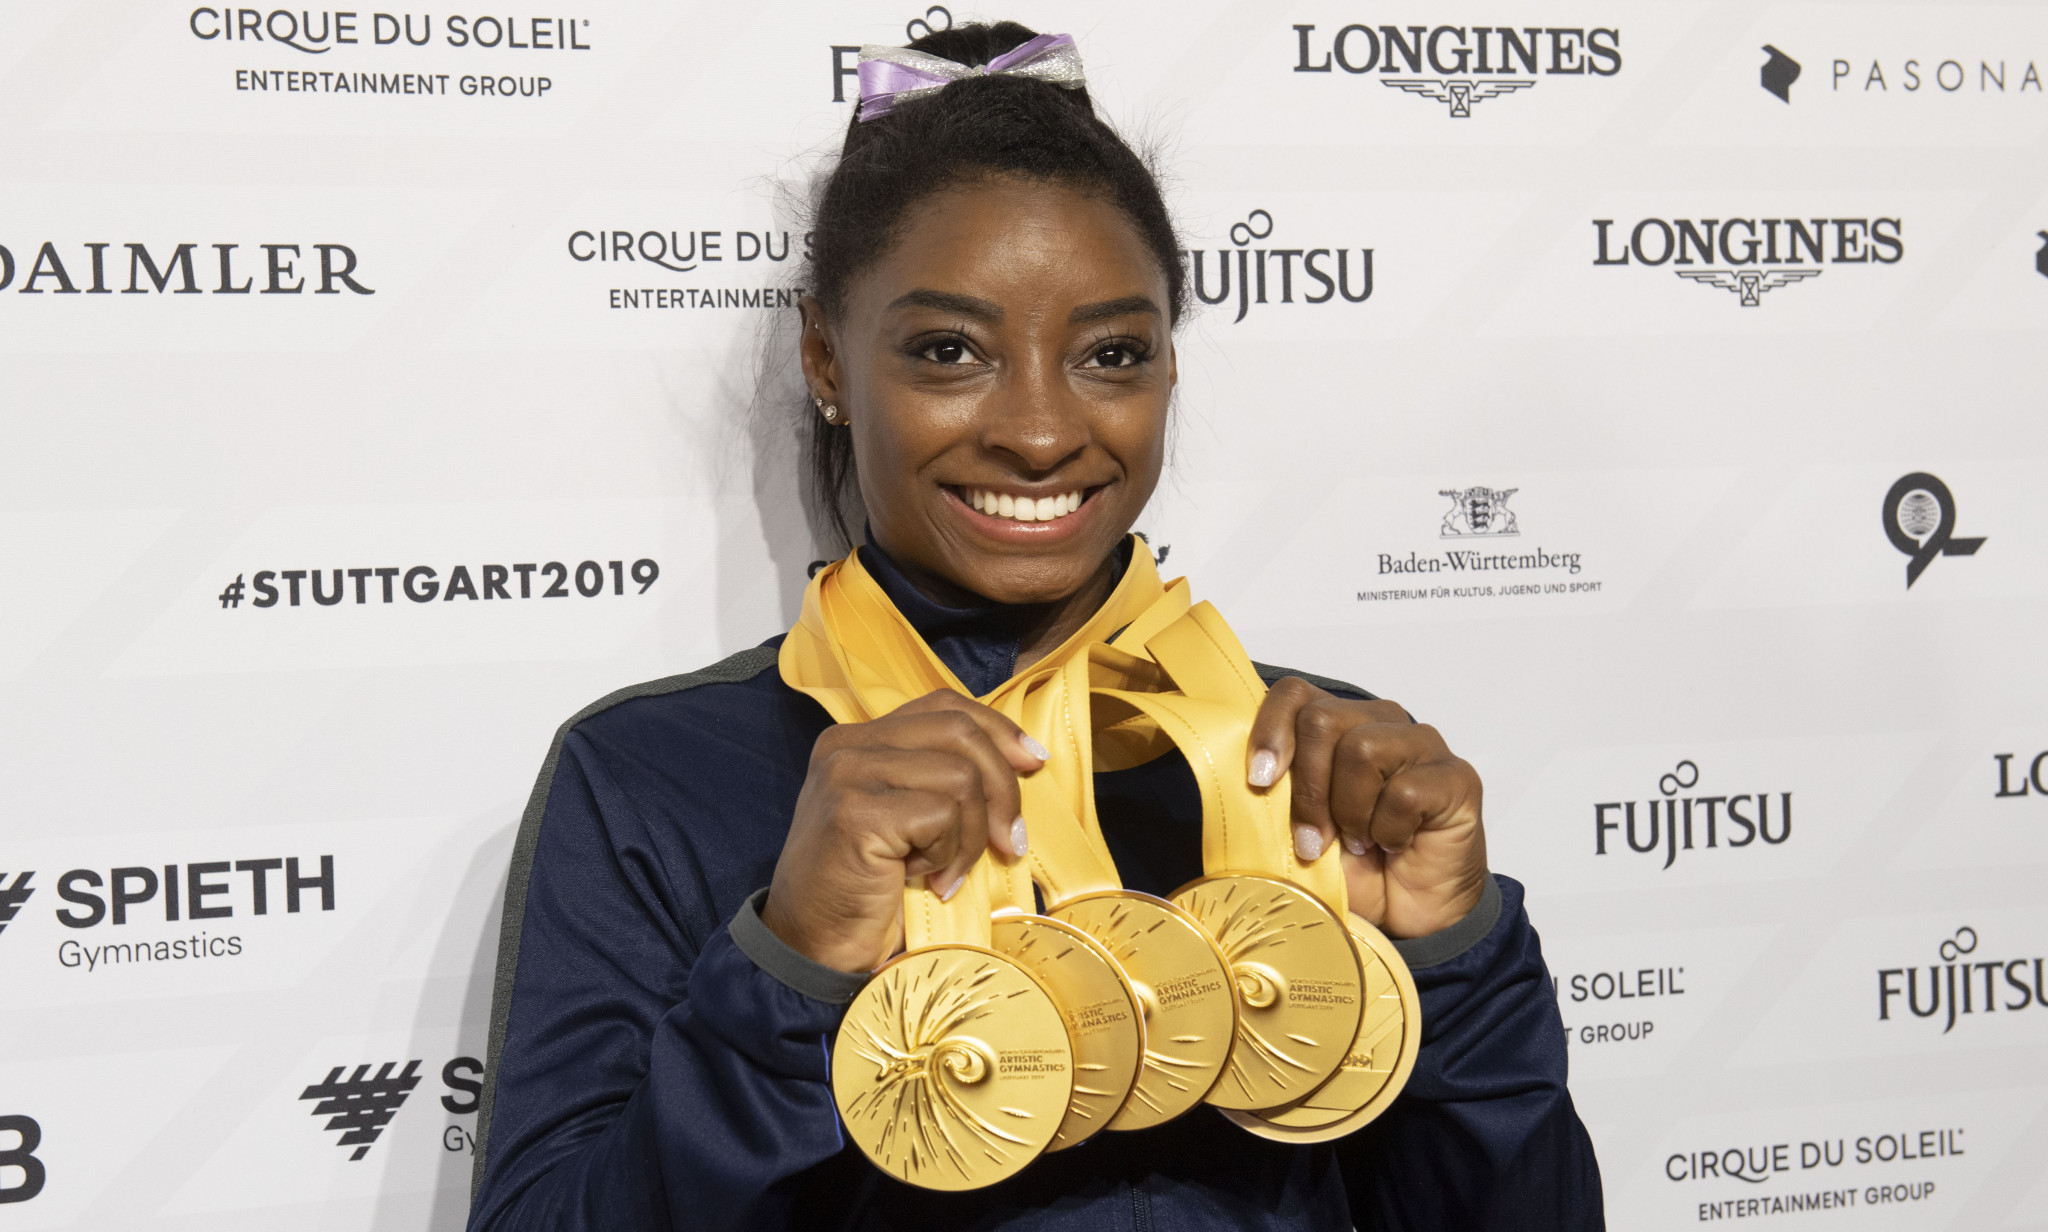 Simone Biles was named Female Olympic Athlete of the Year at the awards ceremony ©Getty Images